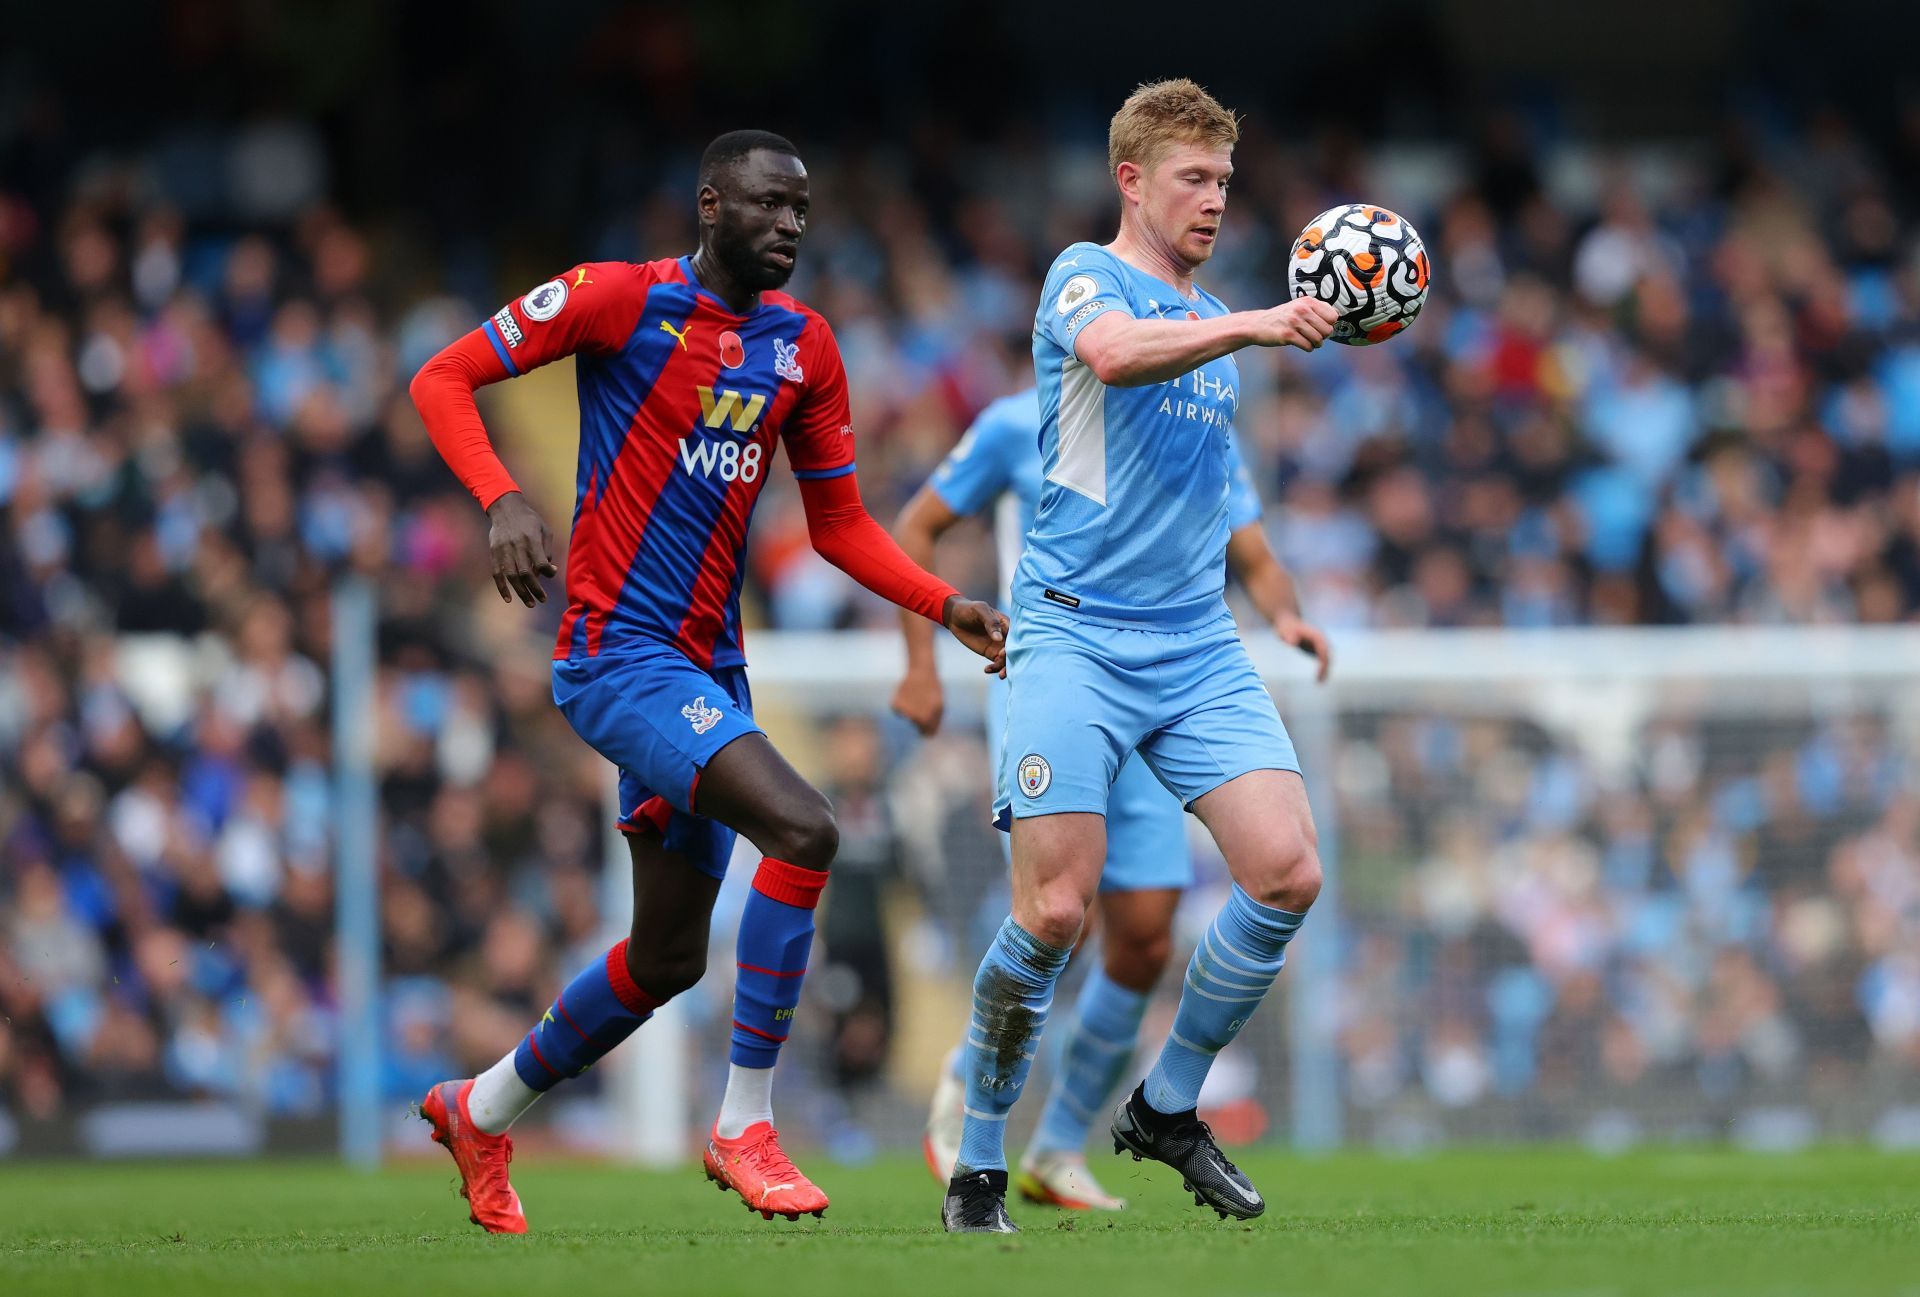 Manchester City take on Crystal Palace this week